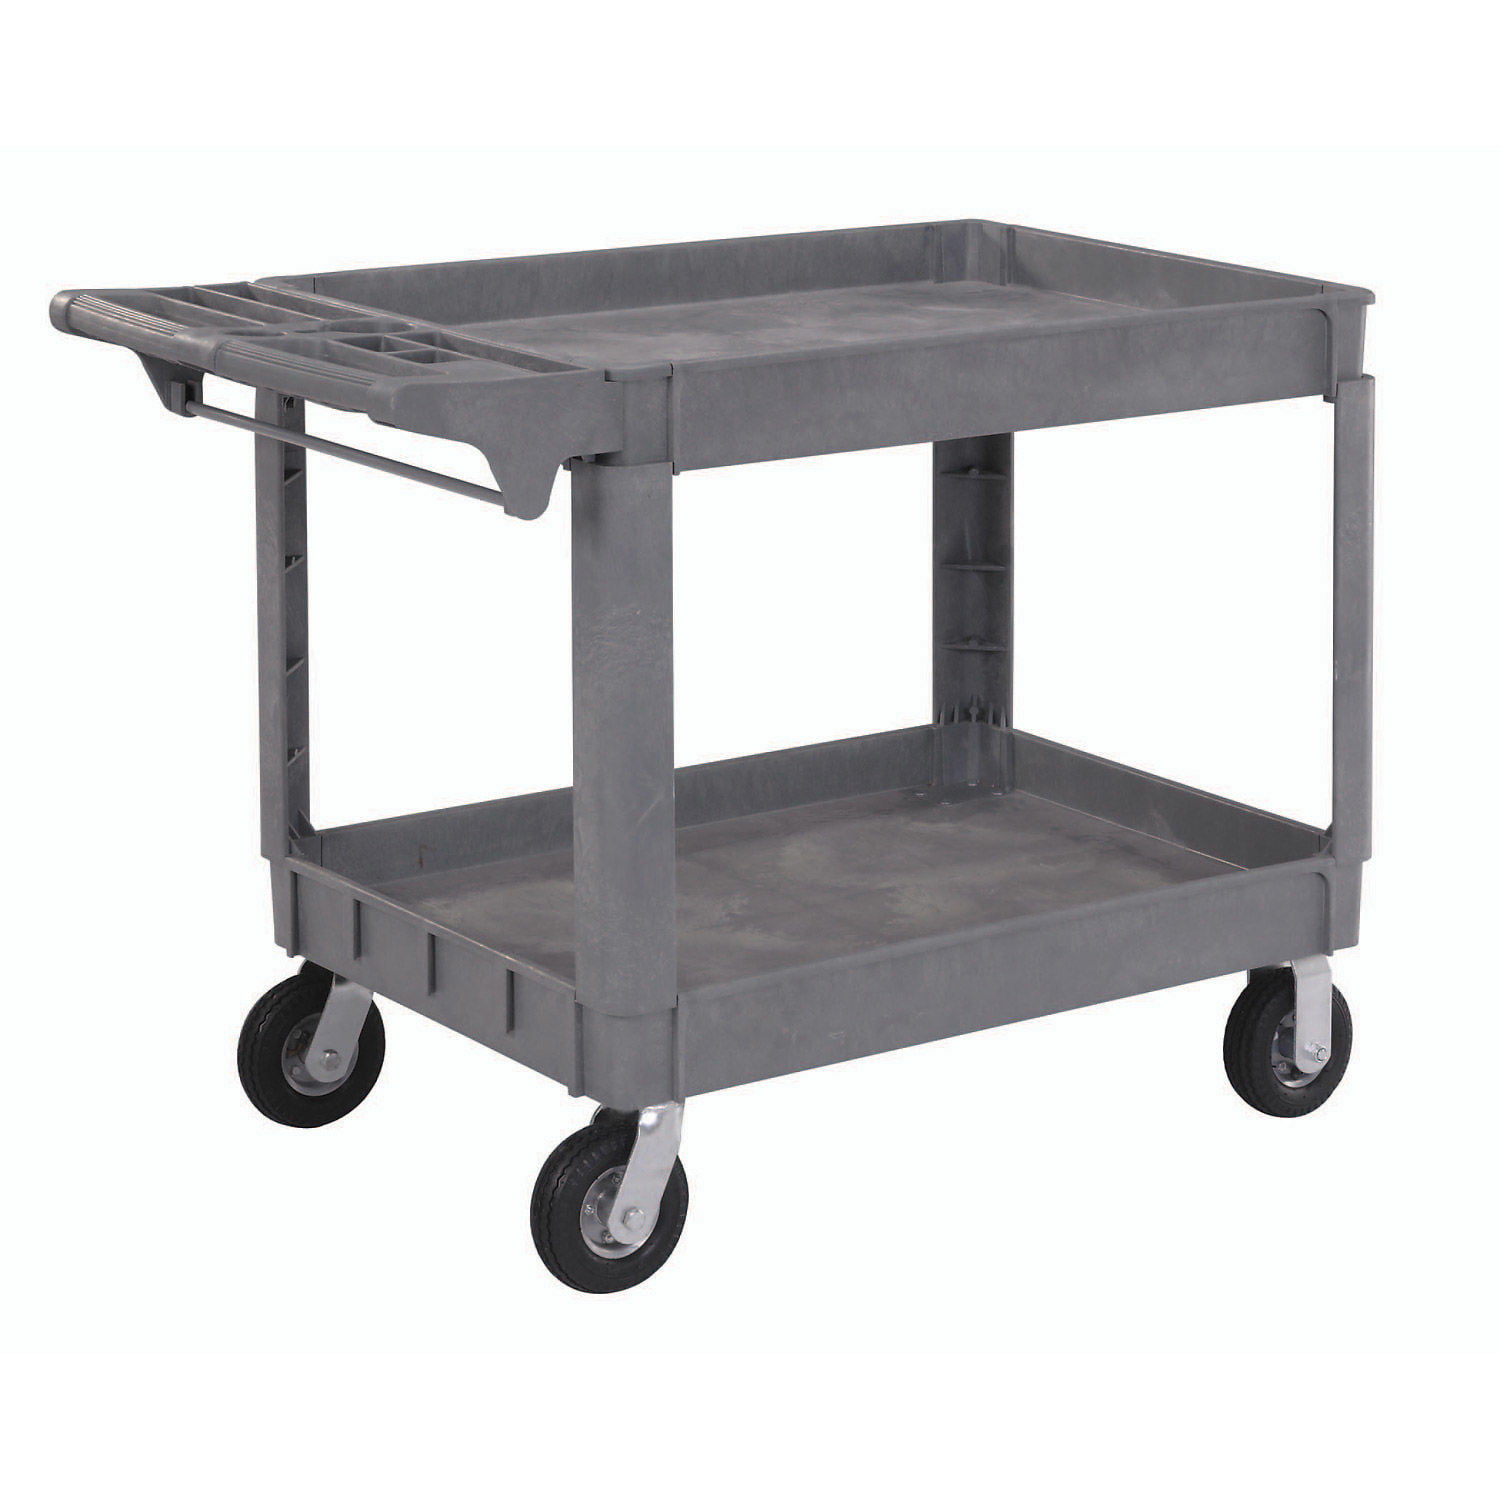 Details about   Plastic Utility 3 tray 550LB Rolling Service Cart Shop Office Warehouse Tray 